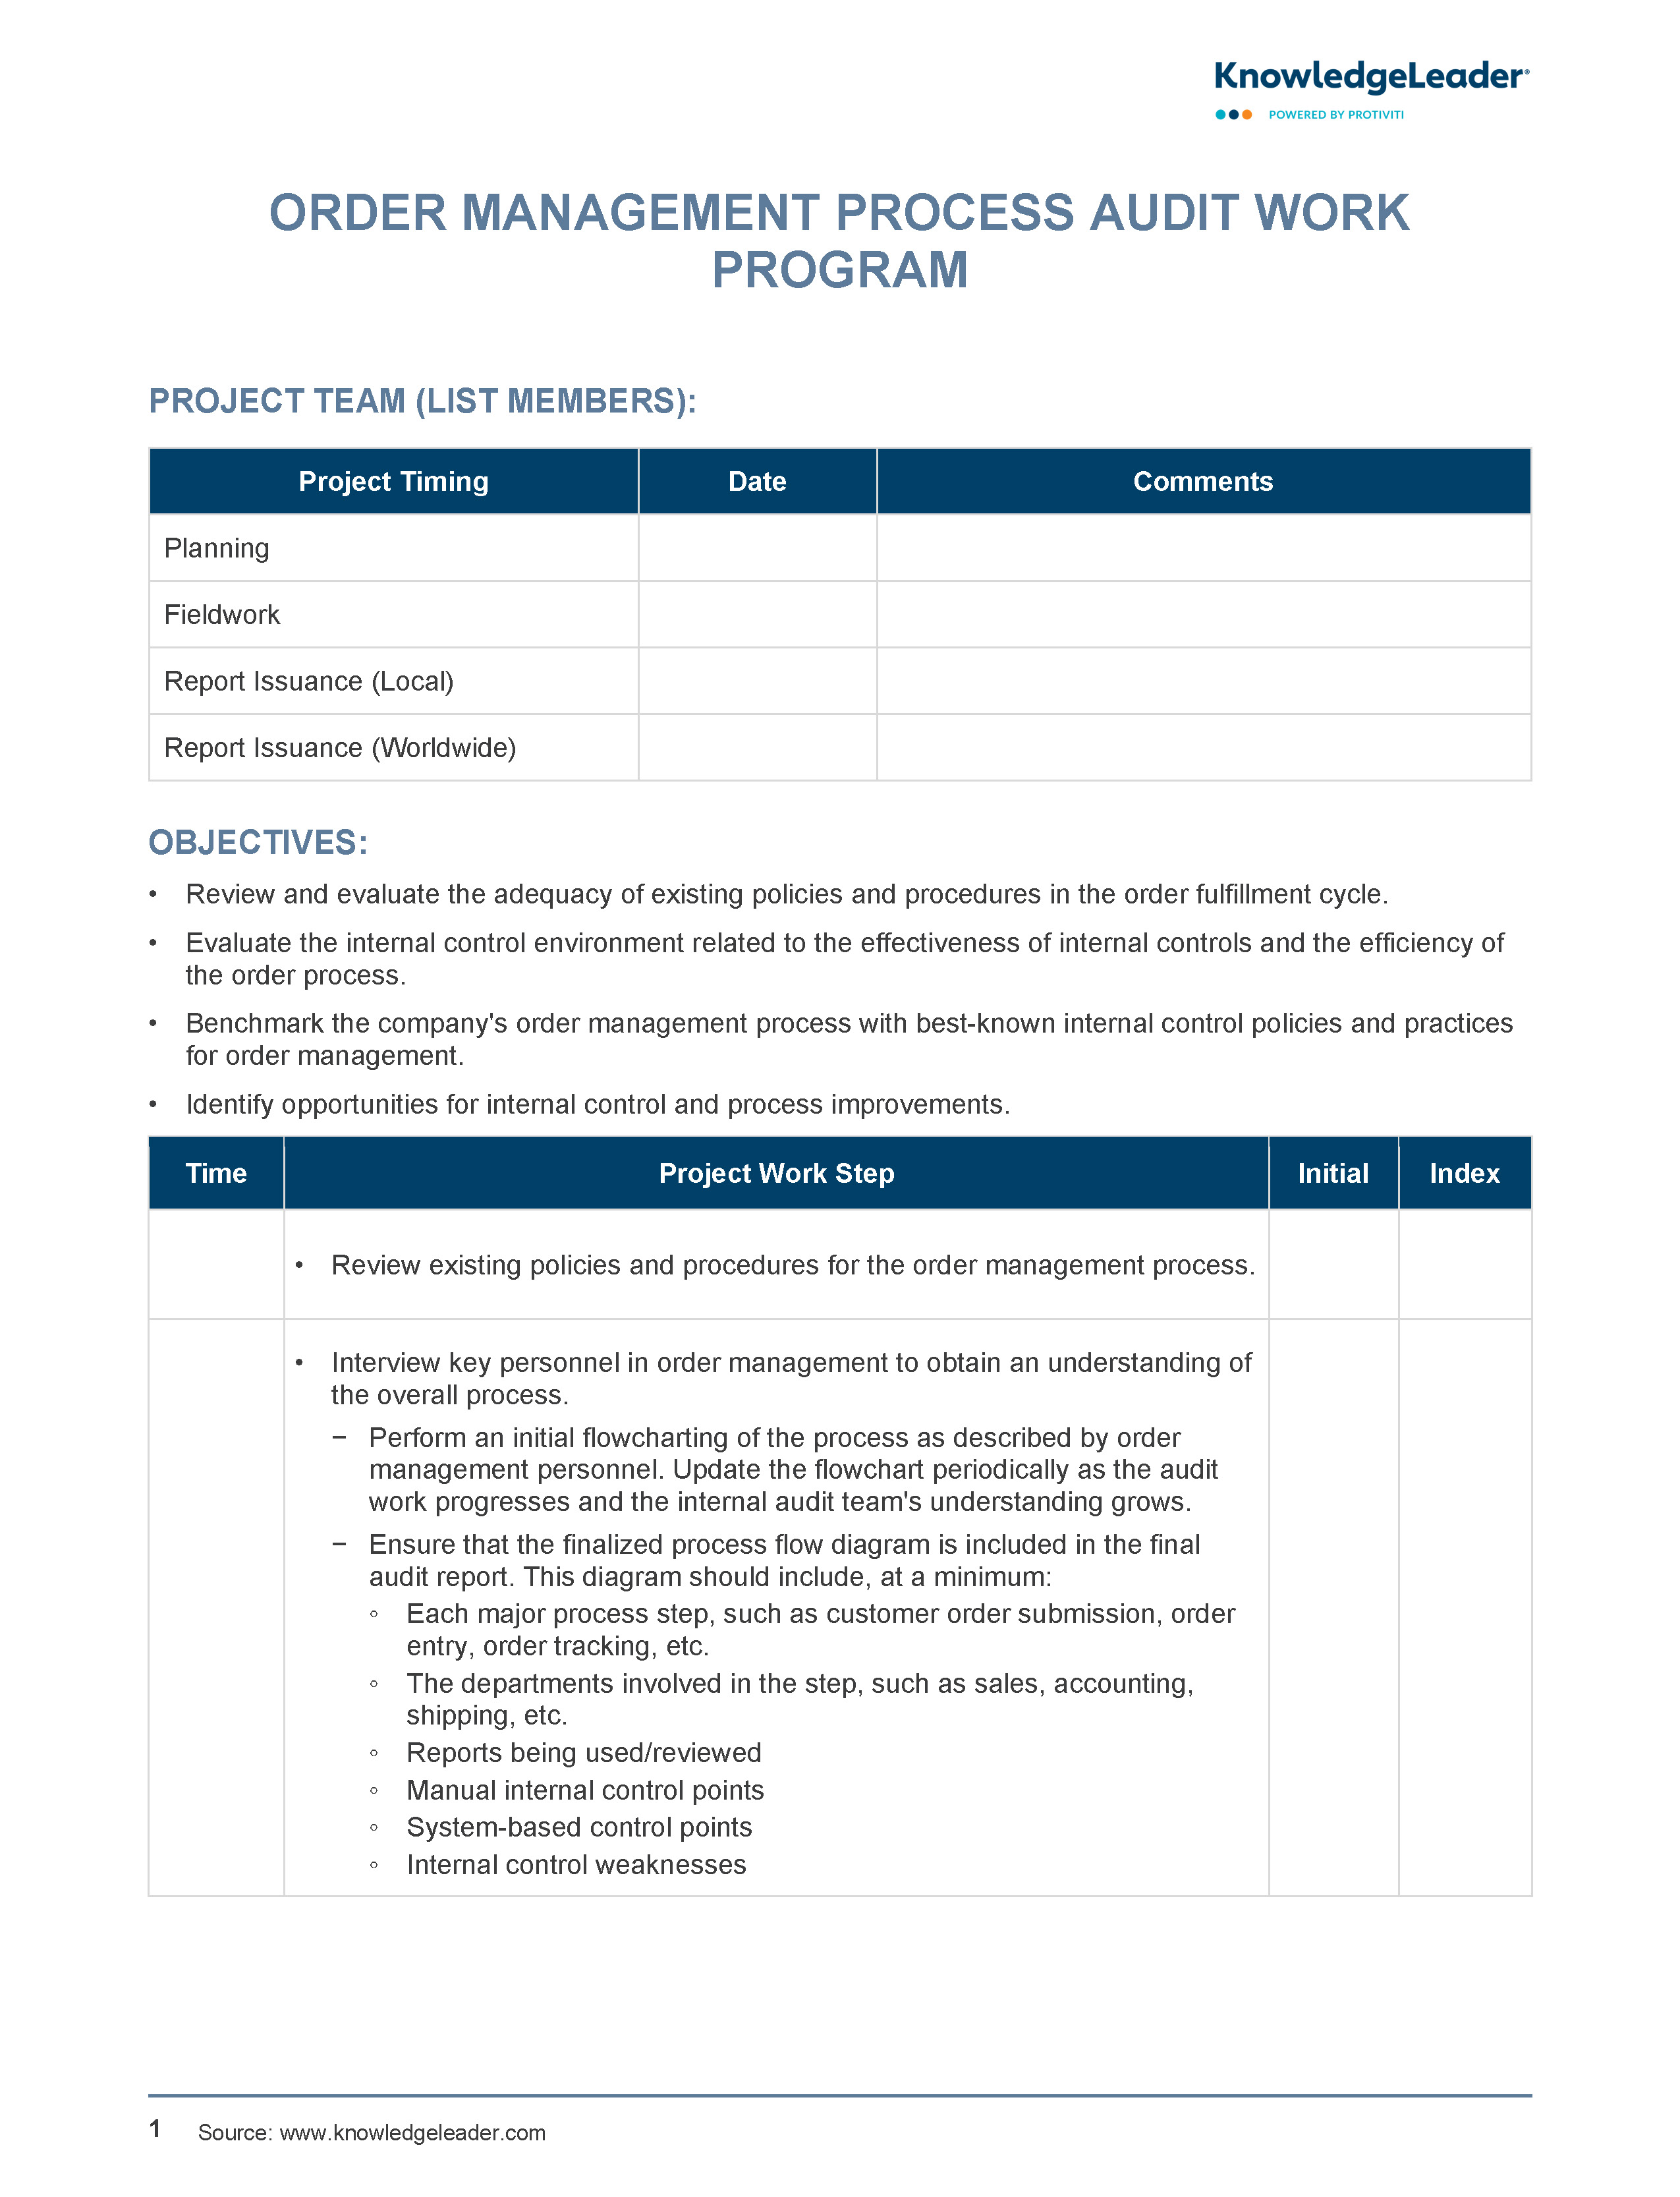 screenshot of the first page of Order Management Process Audit Work Program